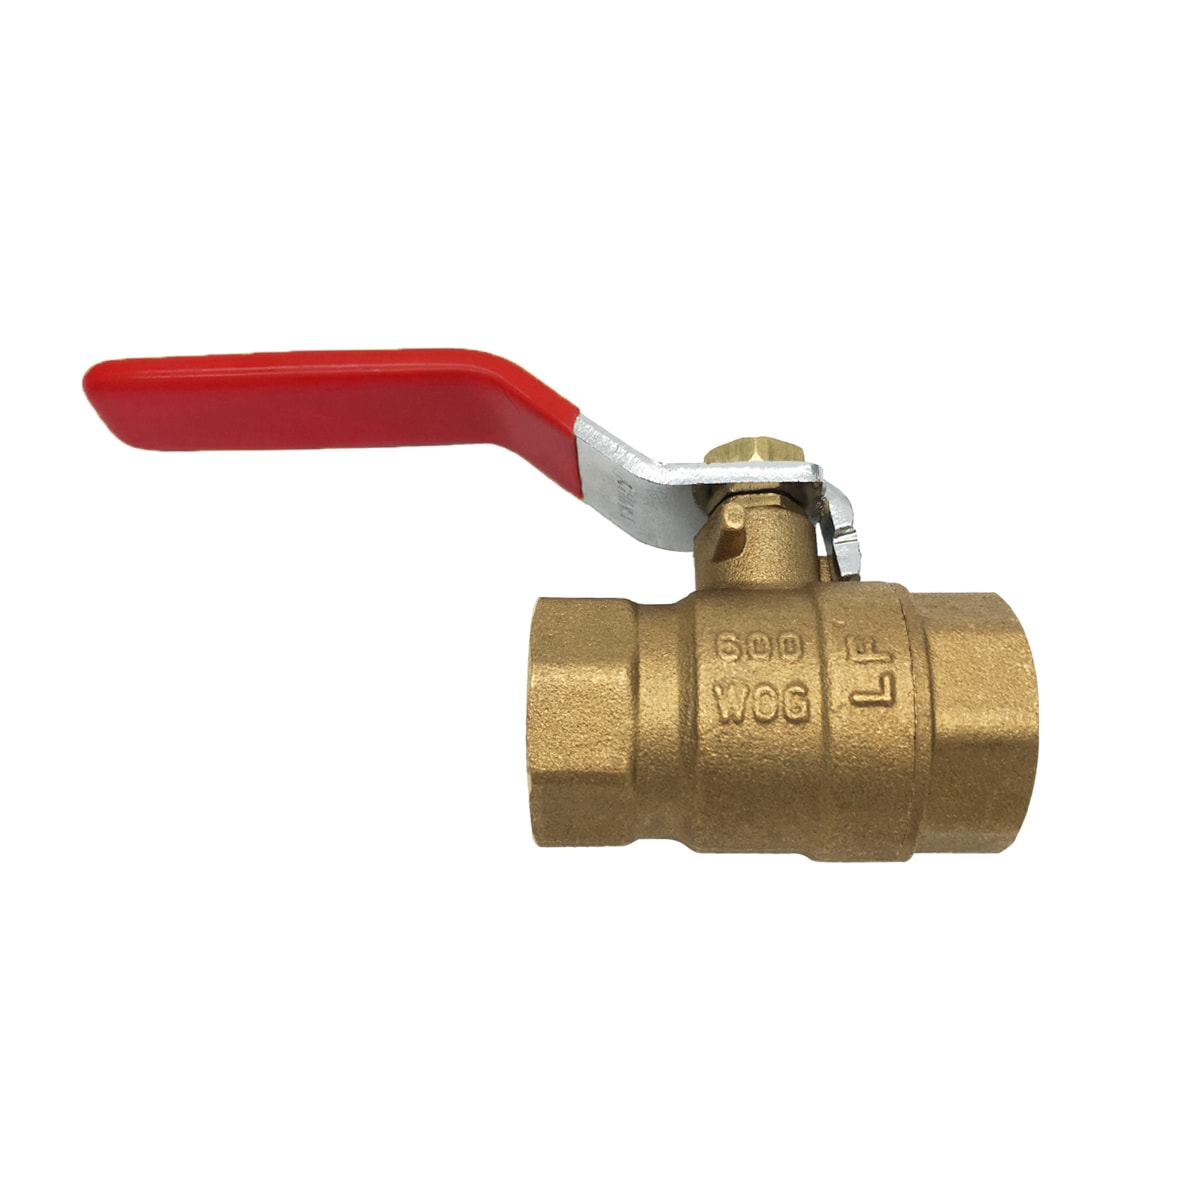 Double Ended Ball Valve for Air lines-Air Compressors   001 2 x 1/4'' BSP Male 